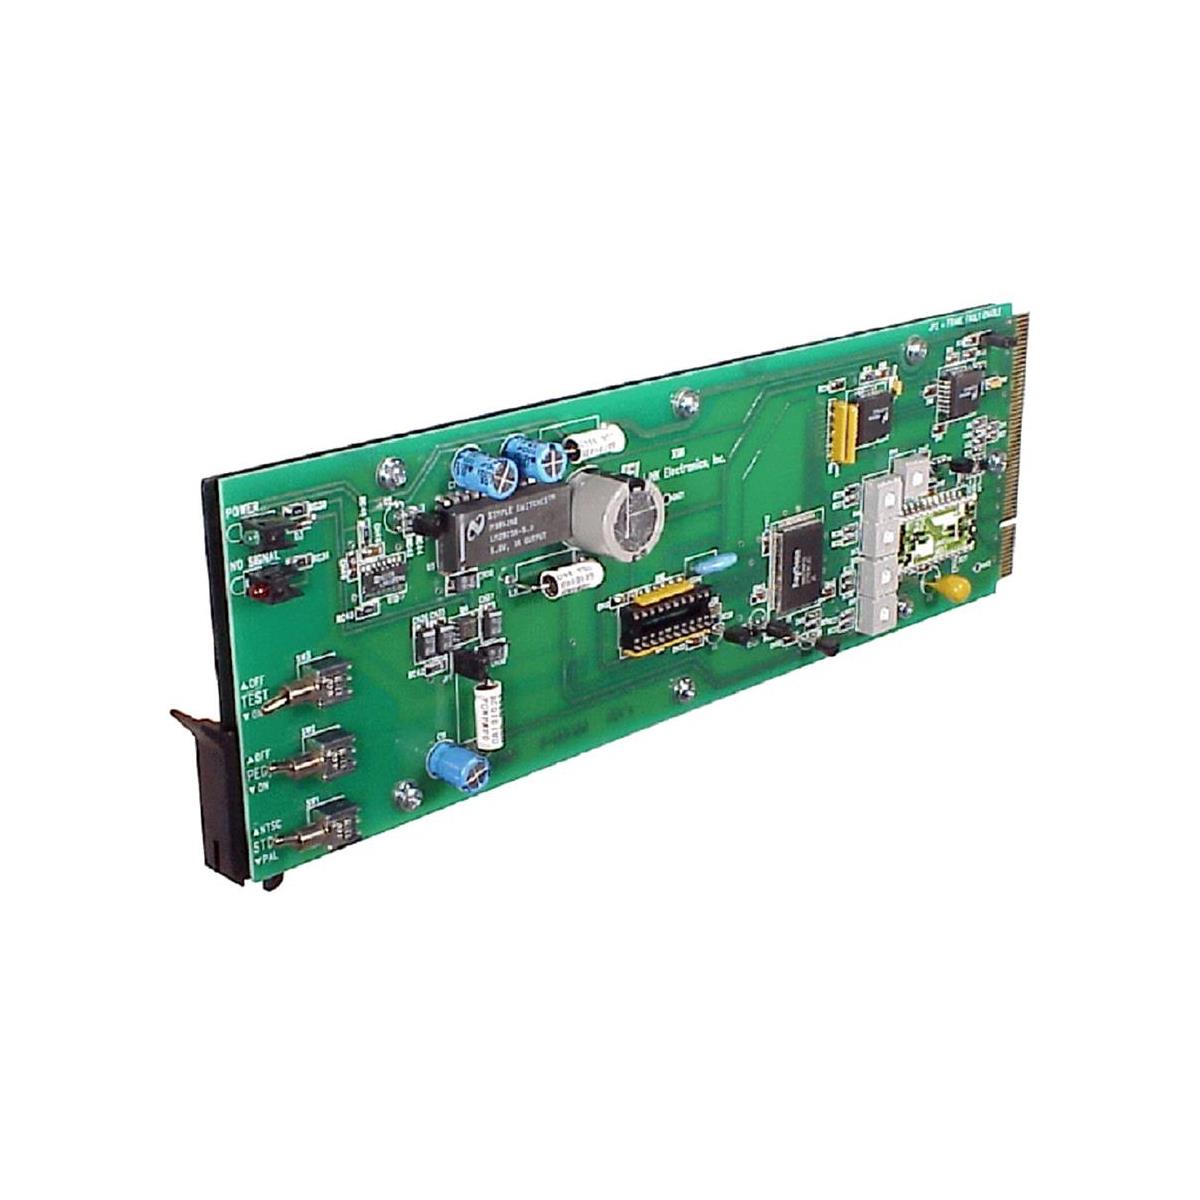 Image of Link Electronics 10 Bit SDI to Composite and Y/C Digital to Analog Converter